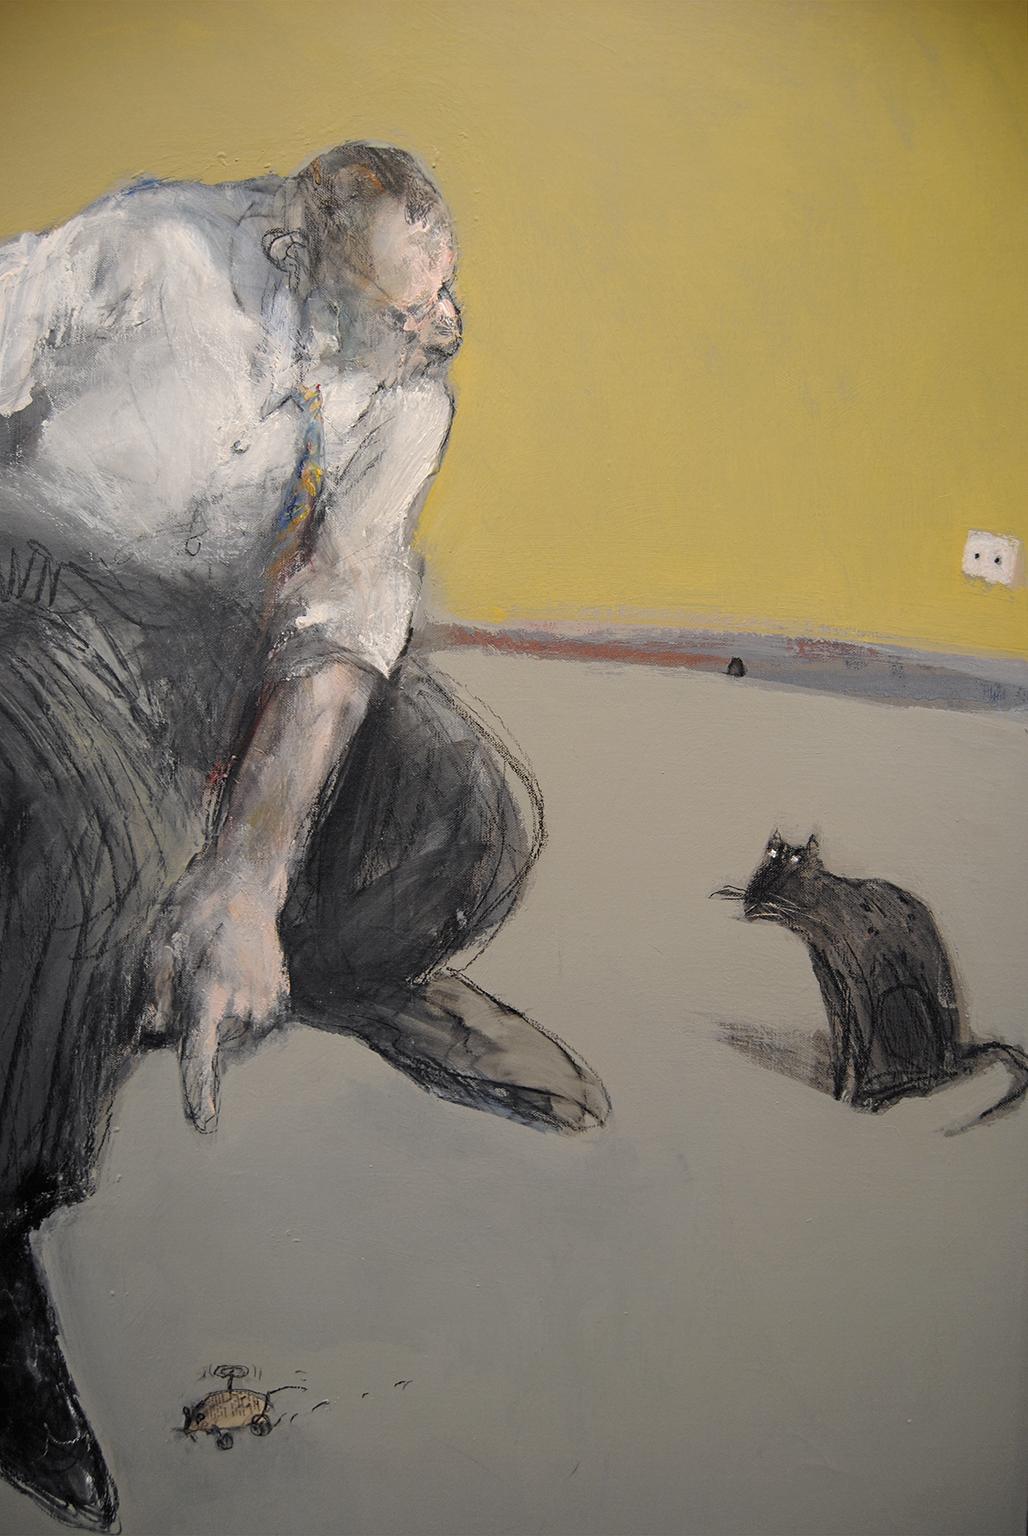 This contemporary, expressionist style oil painting illustrates a male figure, pet cat and a mouse, drawn from imagination using a muted color palette with soft yellows and grays. The painting has a whimsical and humorous quality to it as the